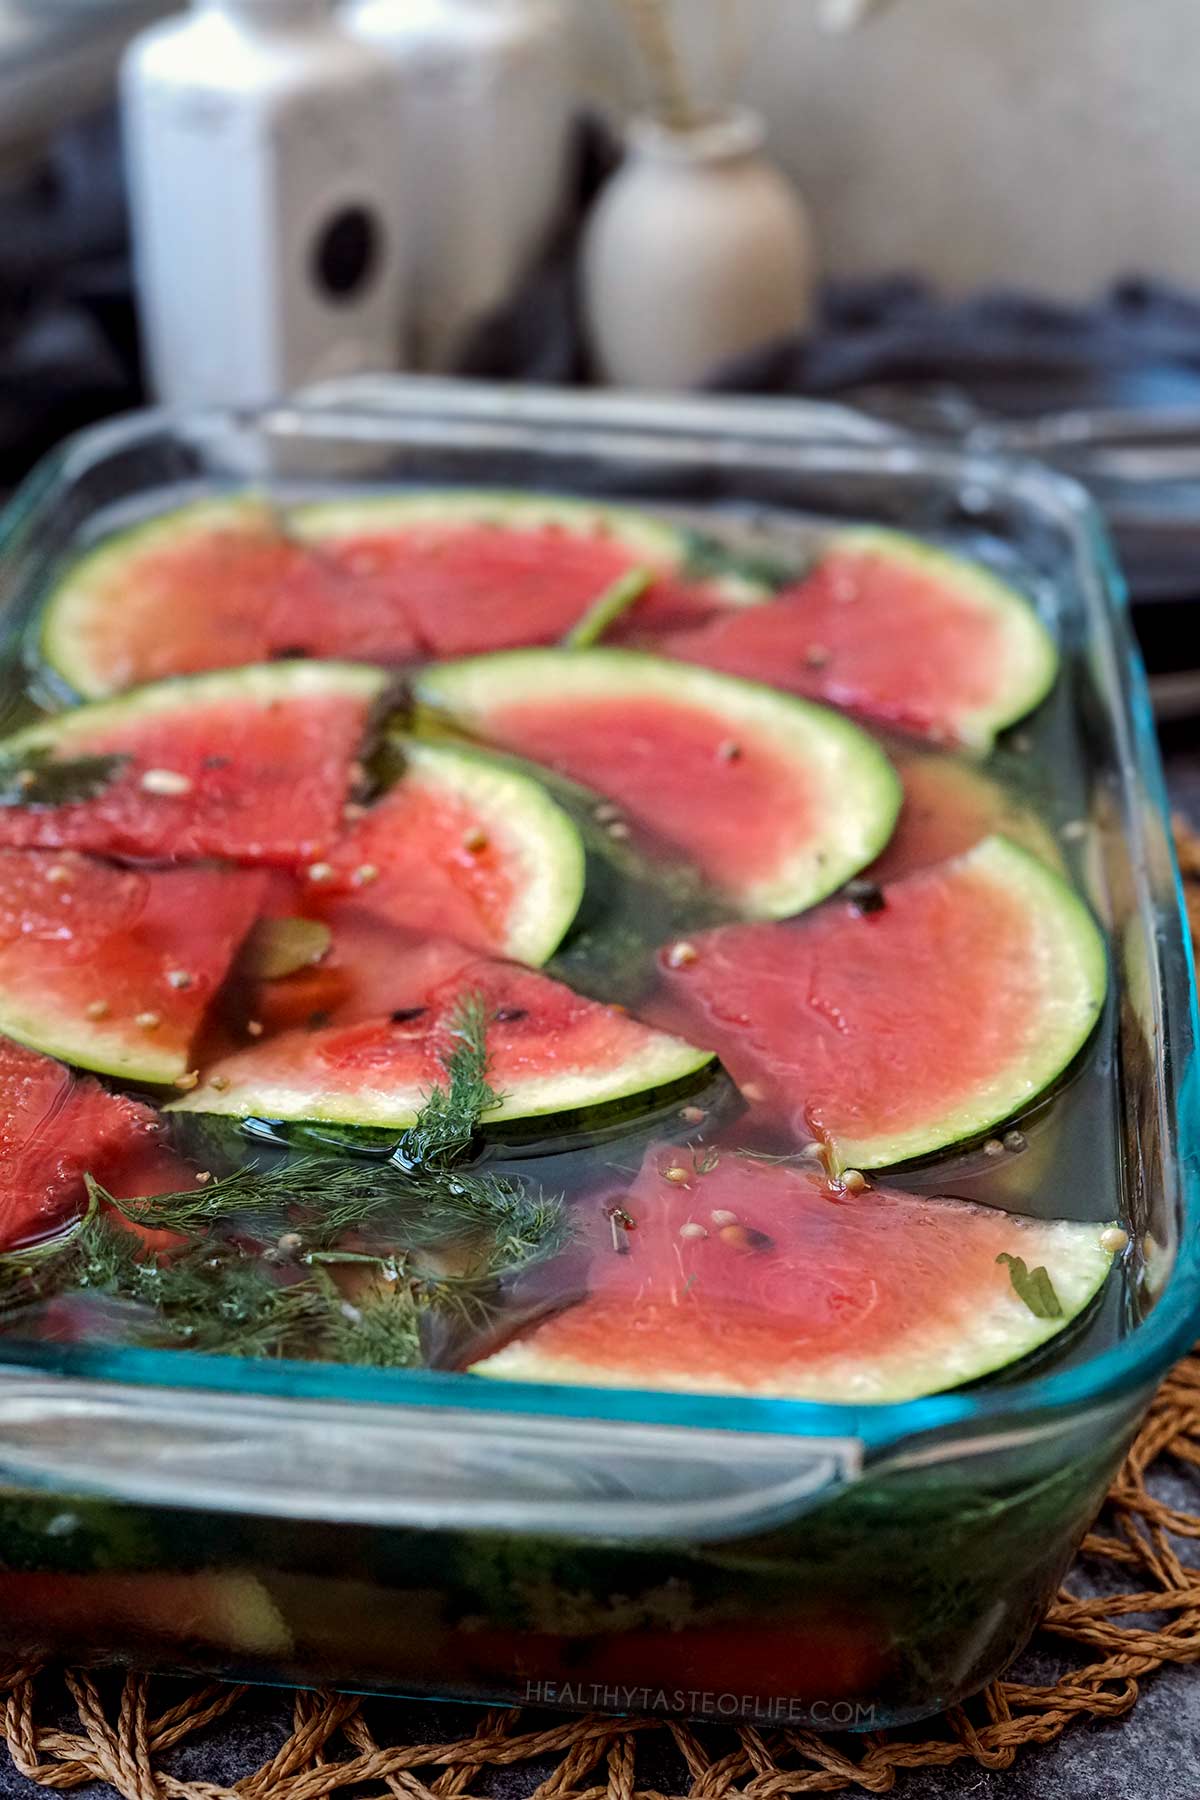 Picture showing the final result, how the fermented watermelon should look like when ready.